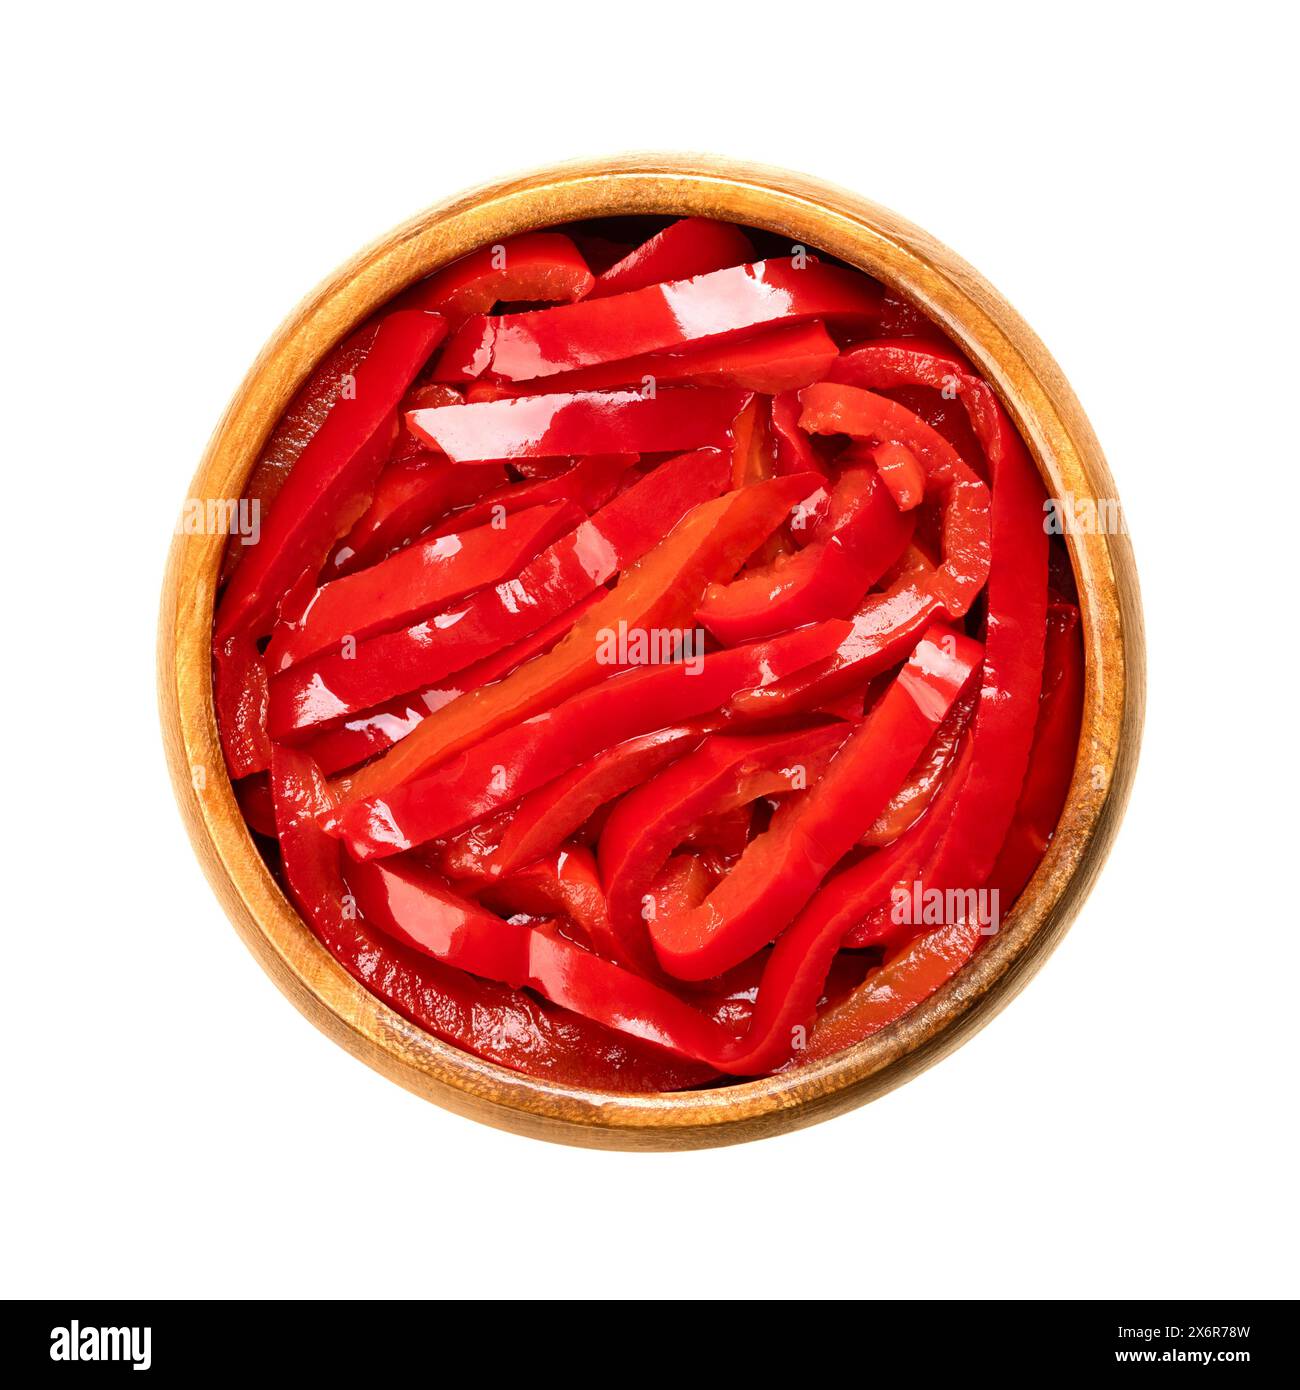 Red pepper salad, pickled red bell pepper strips, in a wooden bowl. Paprika salad, made of sliced, sweet peppers, pasteurized and preserved in vinegar. Stock Photo